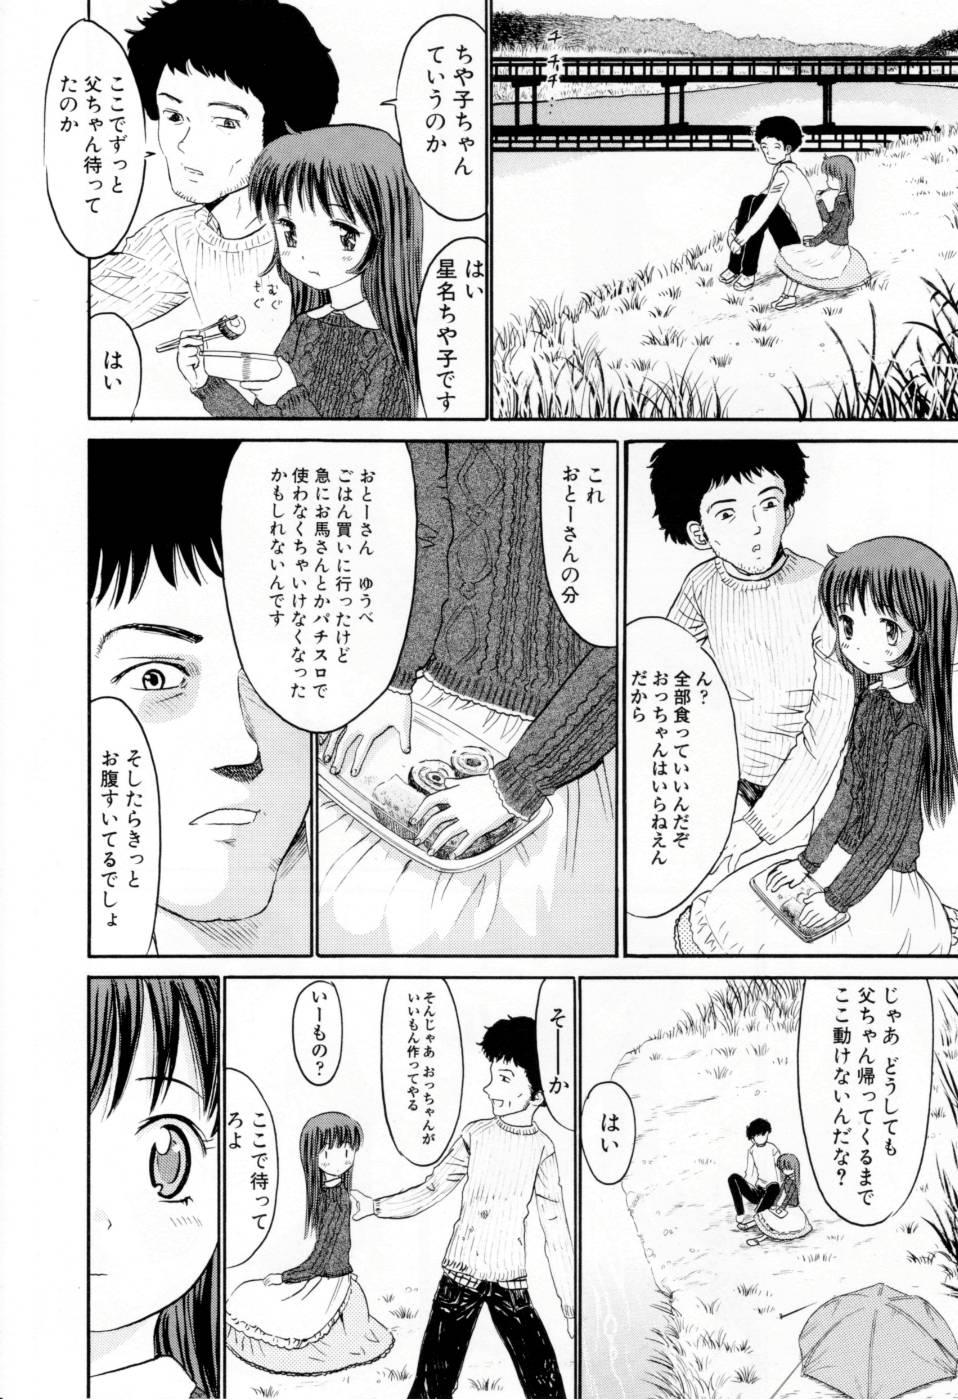 Chinese Amakute Kiken na Kaerimichi - The road which returns is dangerous sweetly Boys - Page 11